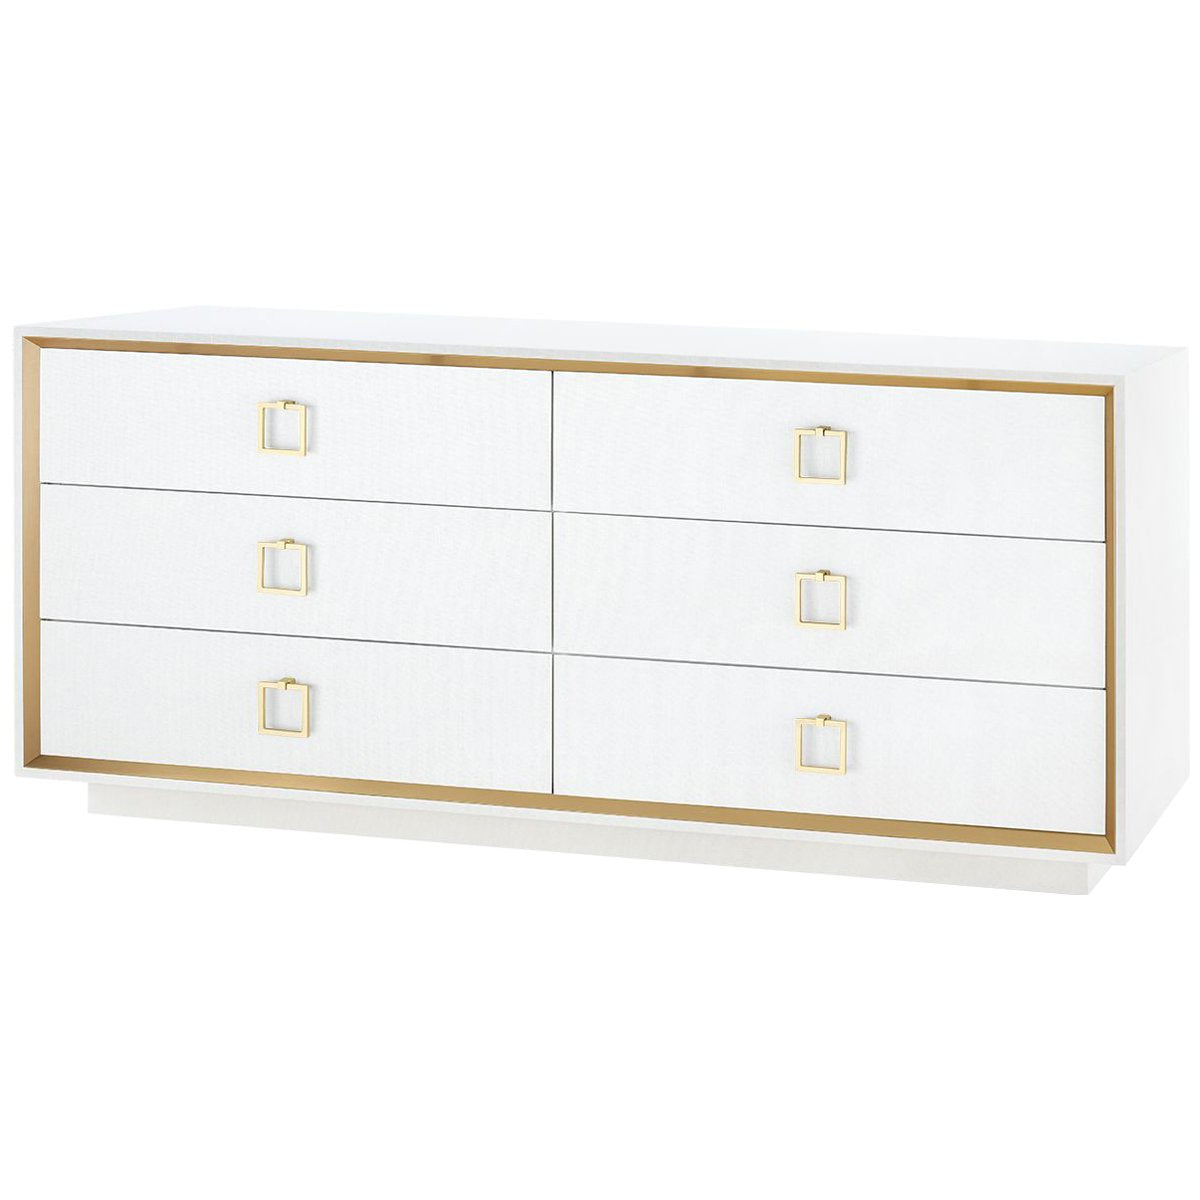 Villa &amp; House Ansel Extra Large 6-Drawer Dresser with Santino Pull